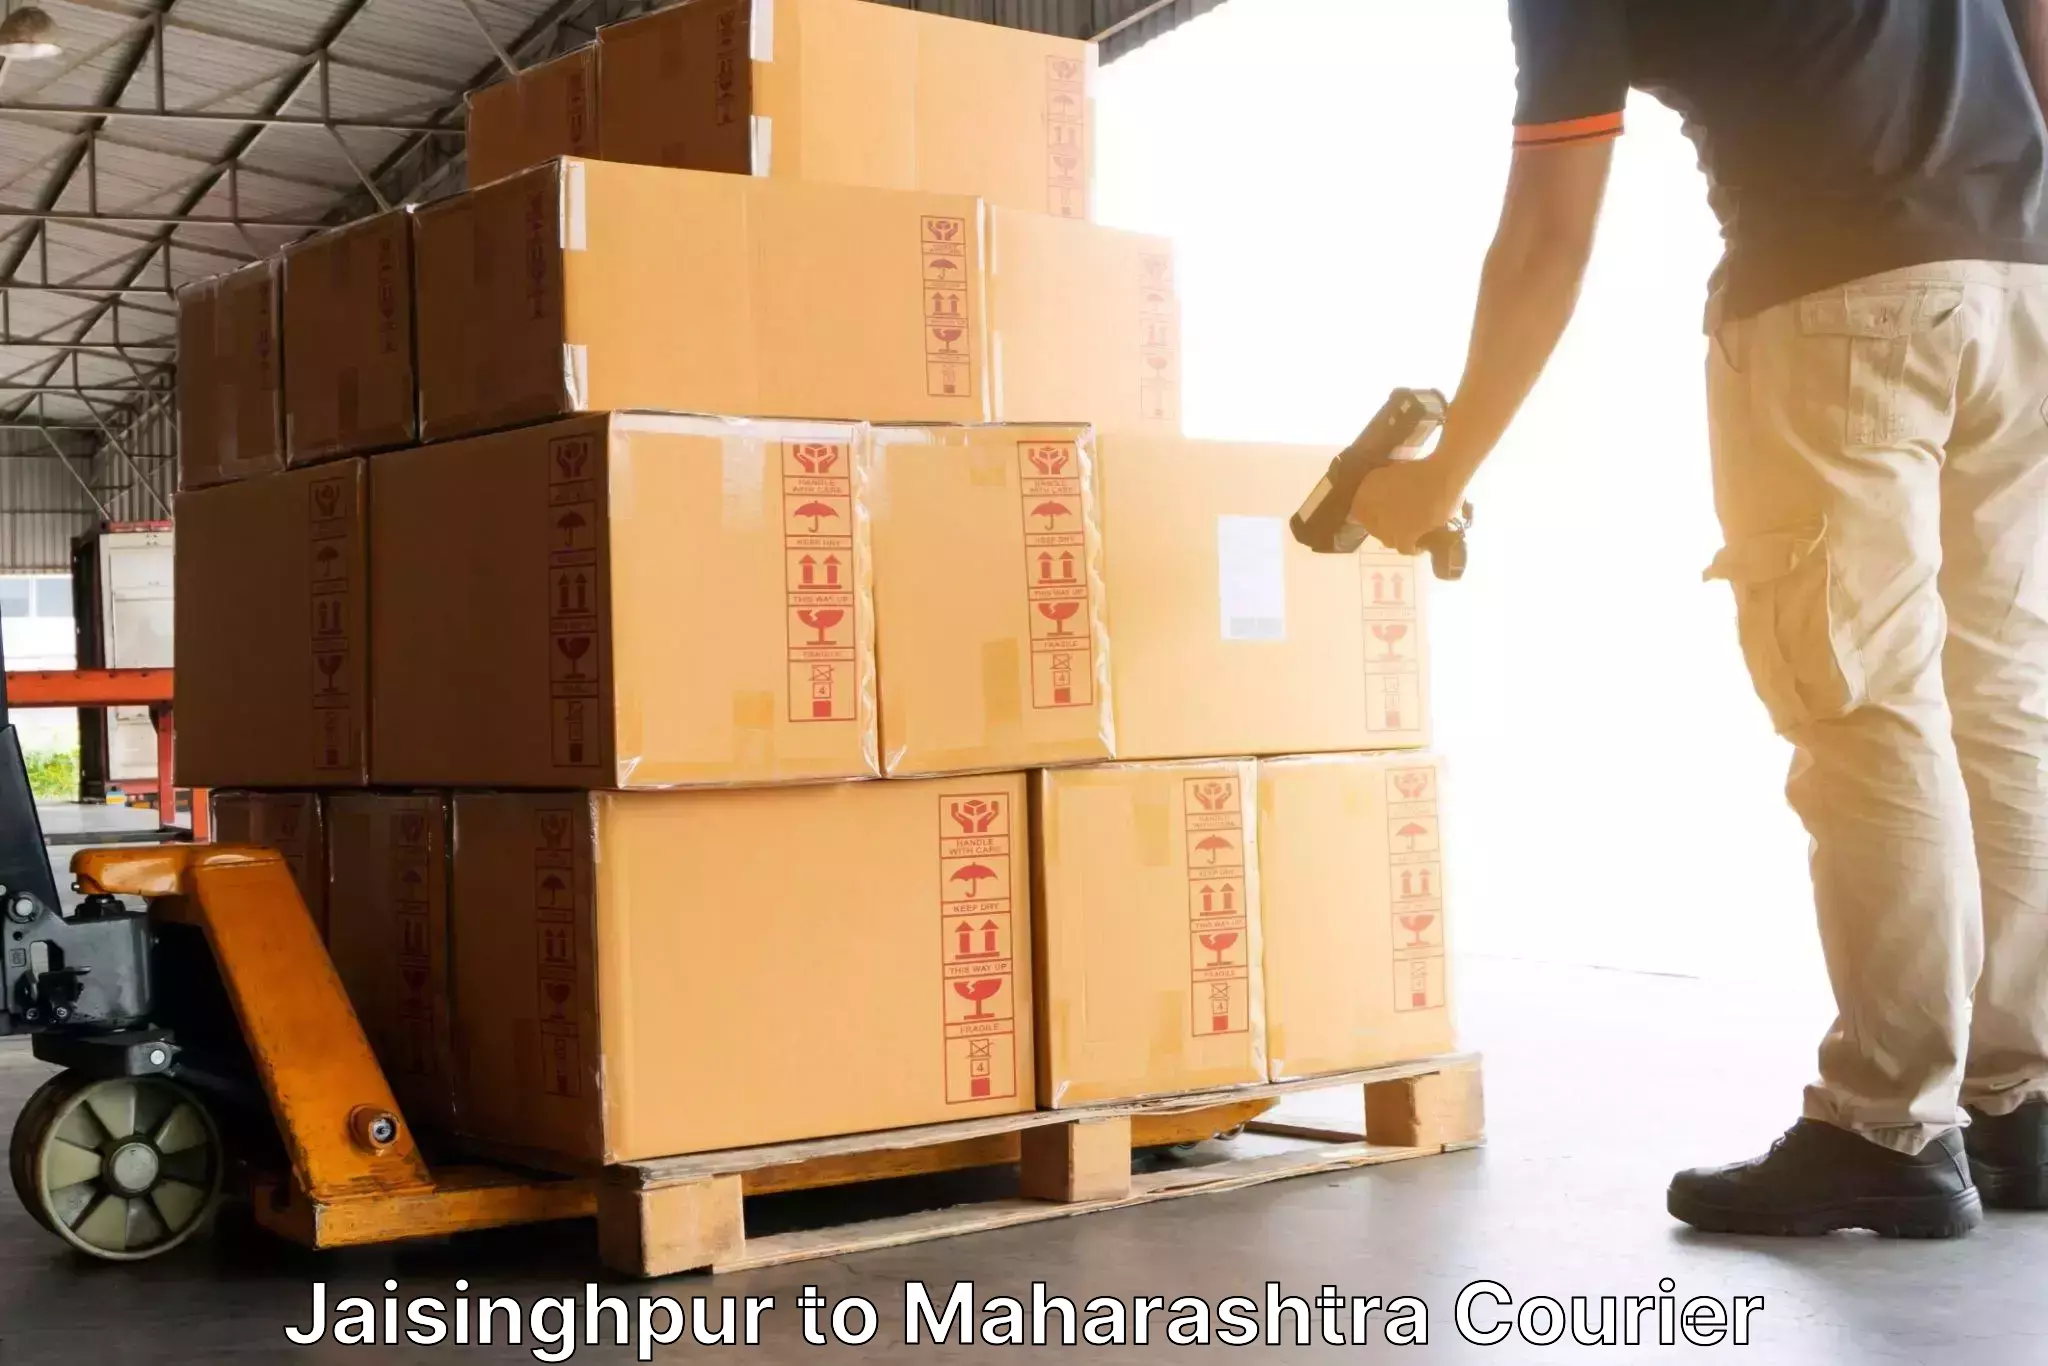 Personal courier services in Jaisinghpur to Boisar